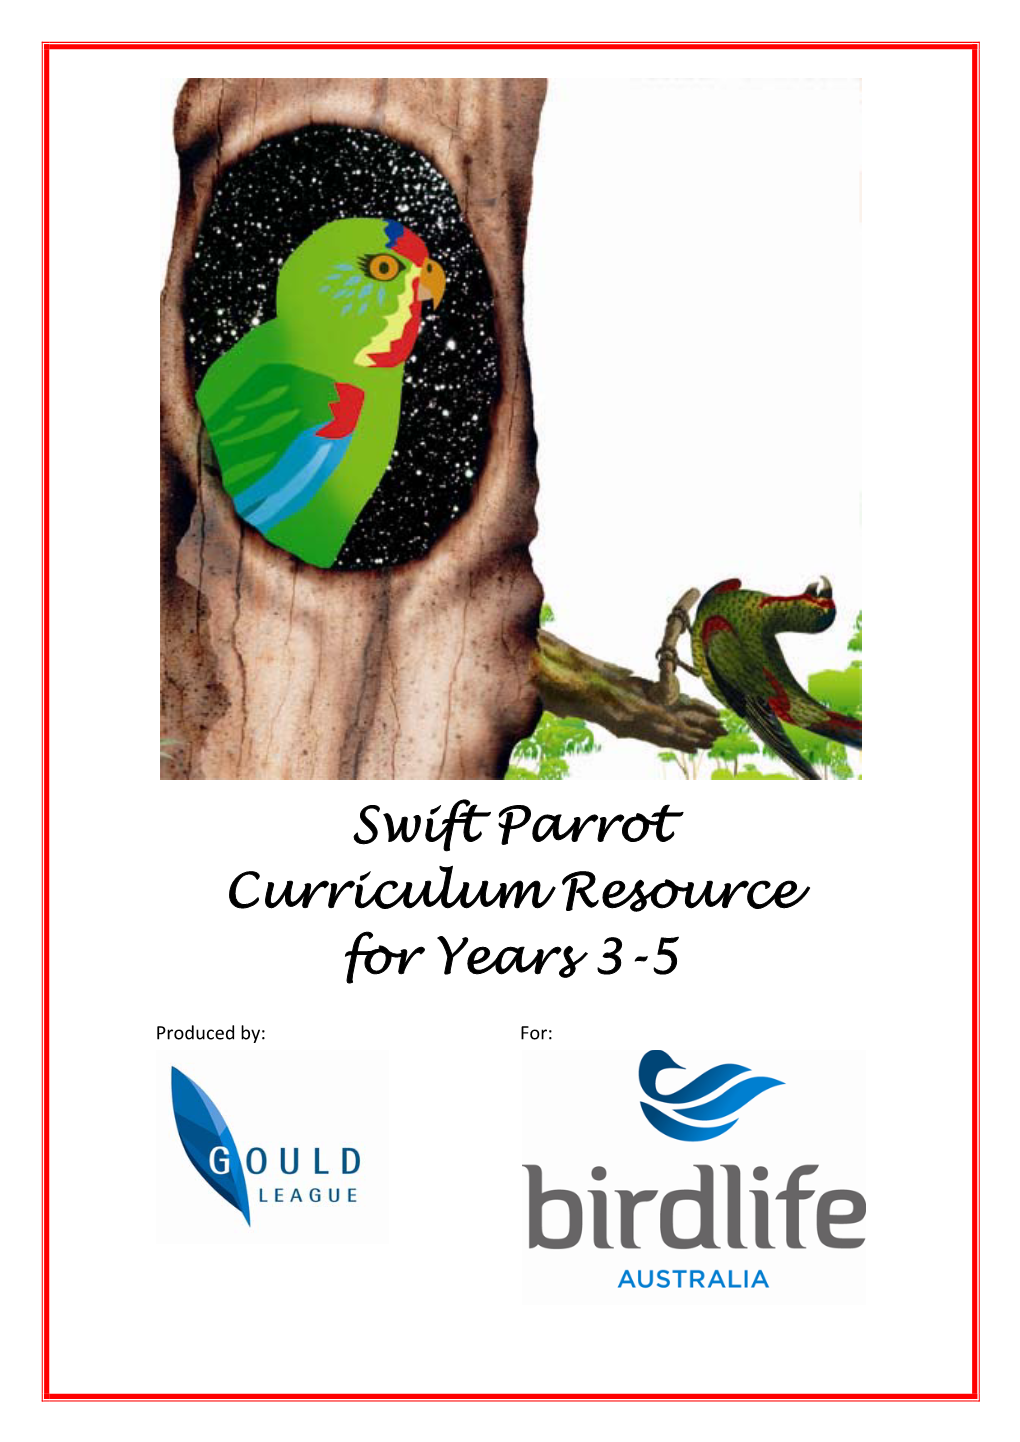 Swift Parrot Curriculum Resource for Years 3-5